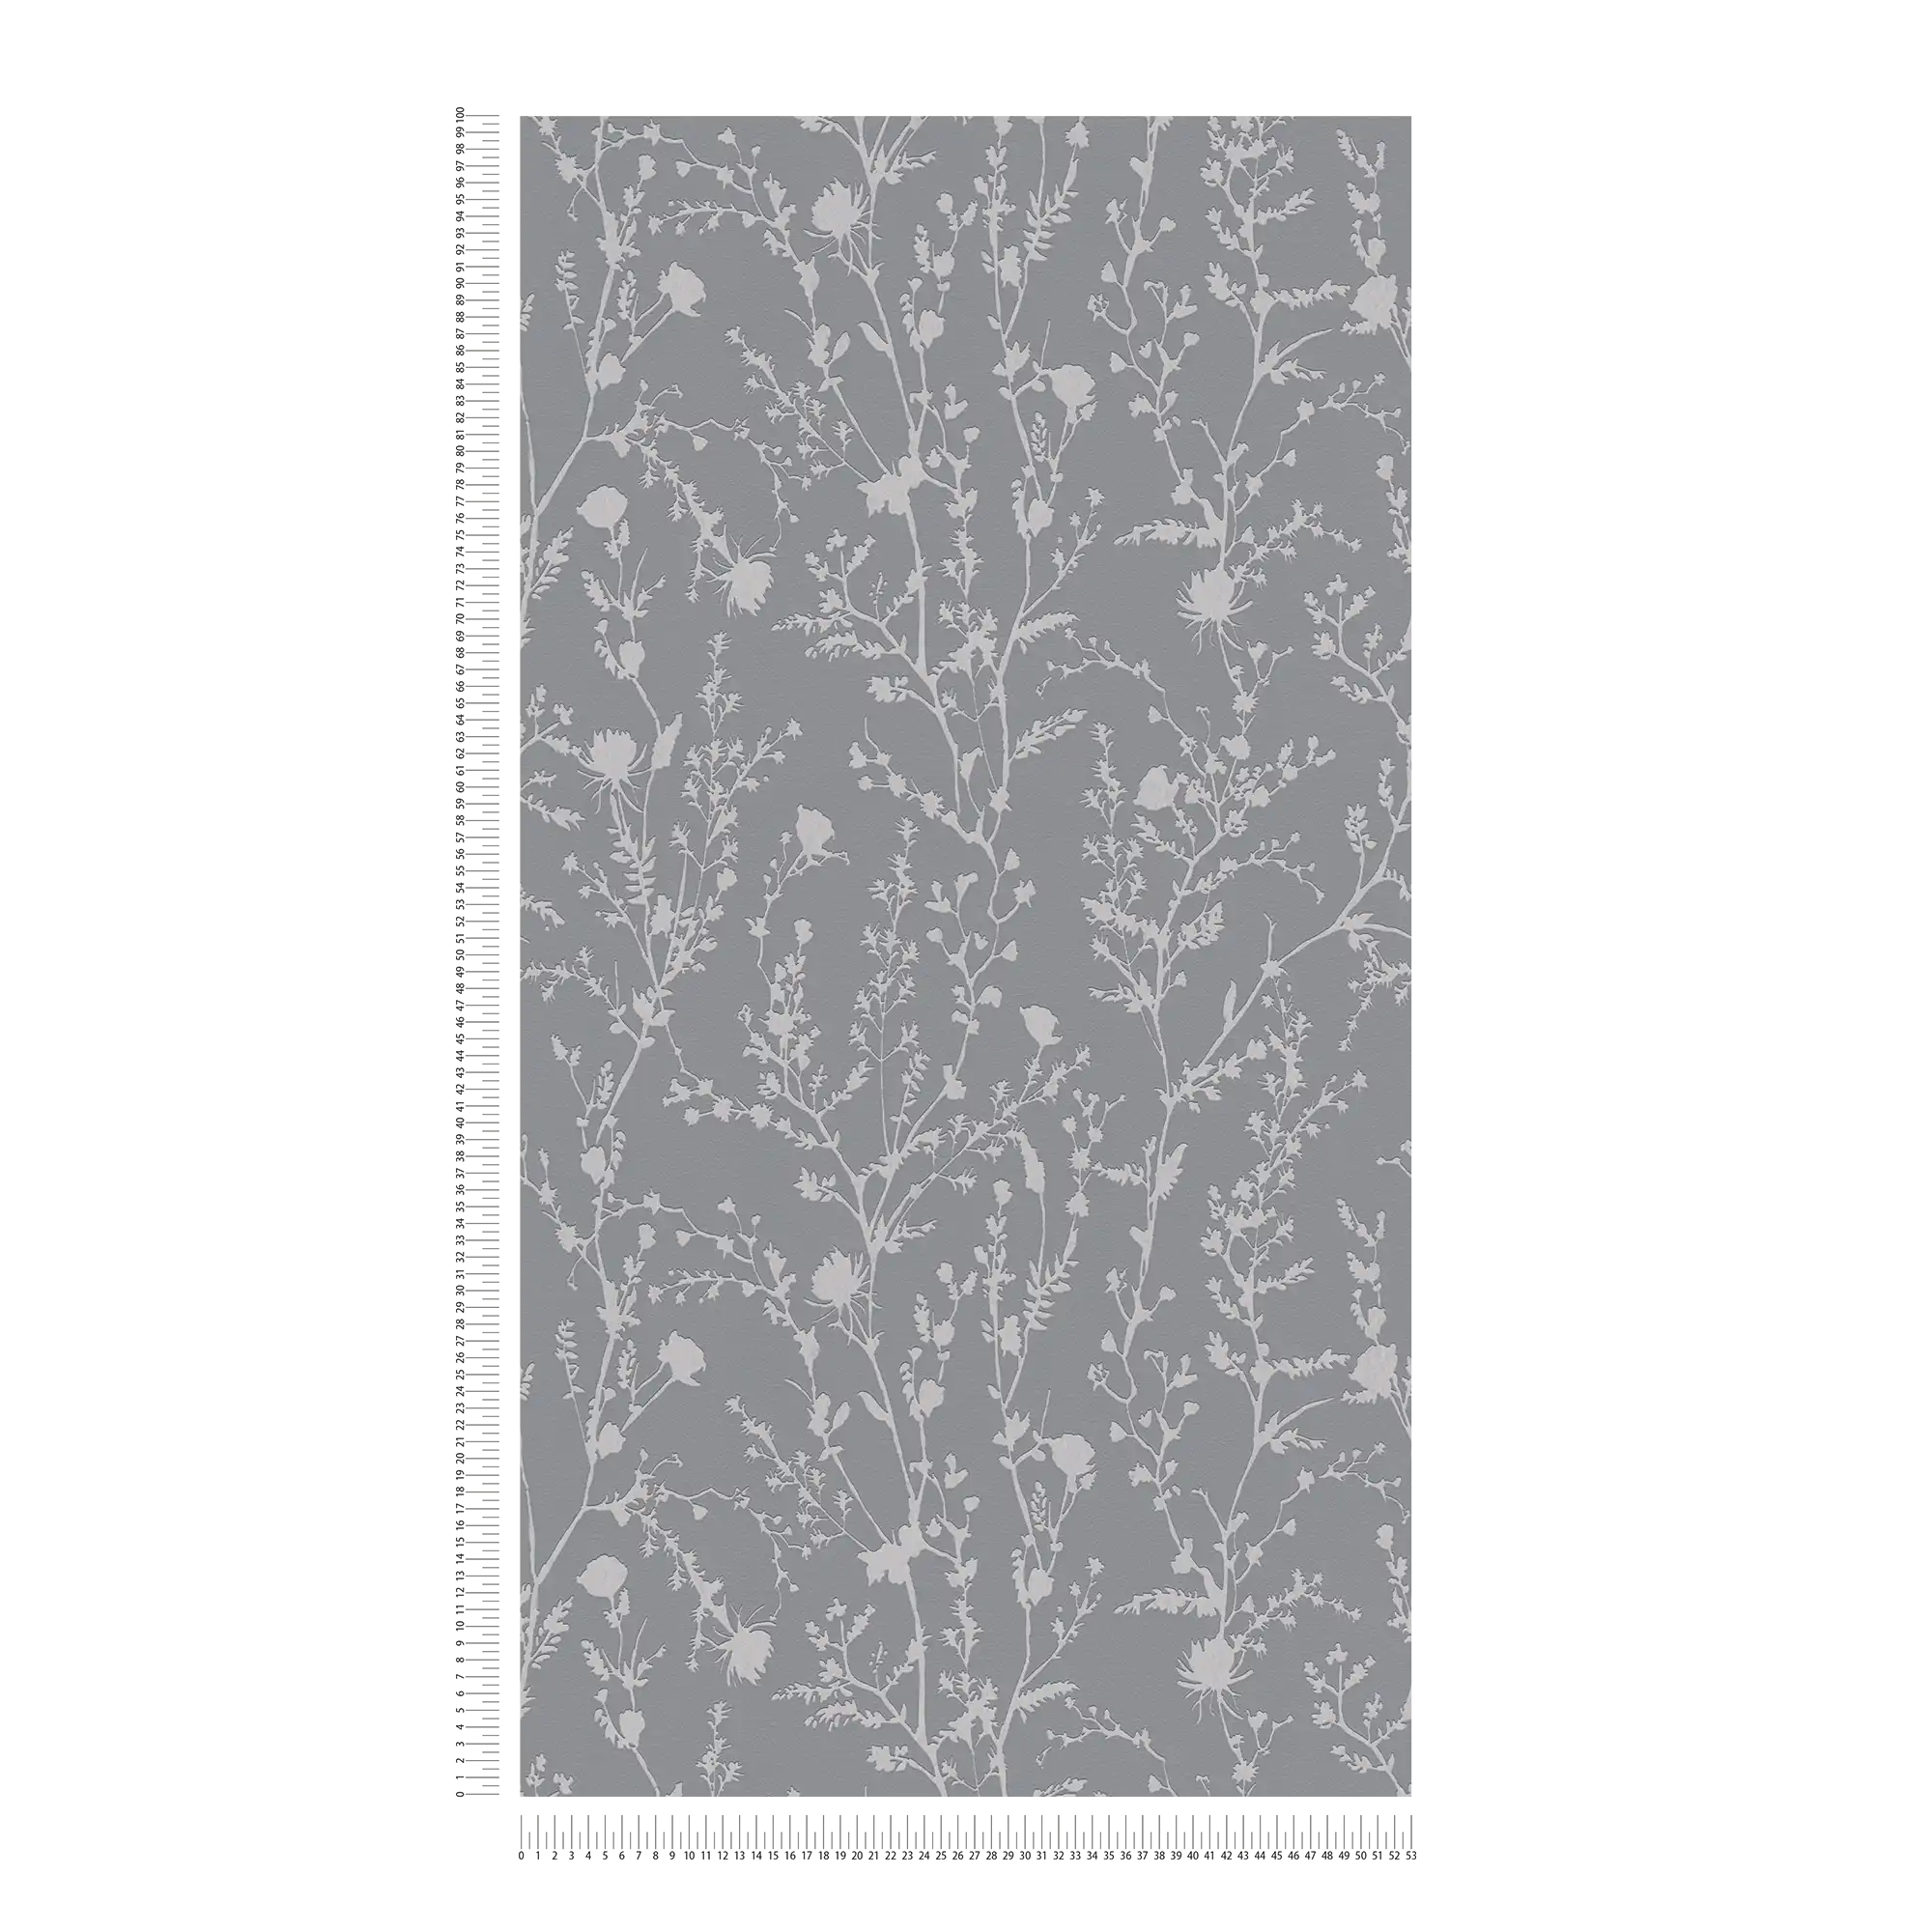             Floral wallpaper with soft grasses and blossoms pattern - grey, silver
        